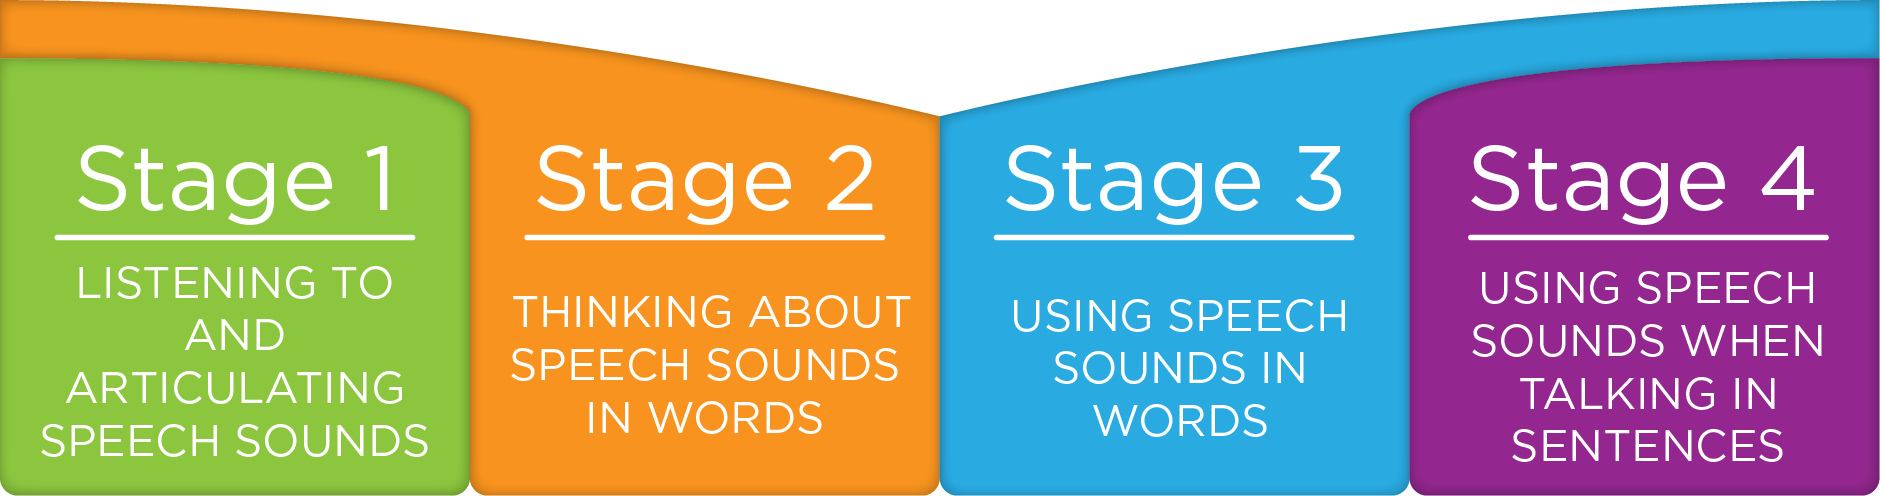 Stage 1: Listening to and Articulaing Speech Sounds. Stage 2: Thinking about Speech Sounds in Words. Stage 3: Using Speech Sounds in Words. Stage 4: Using Speech Sounds when Talking in Sentences.